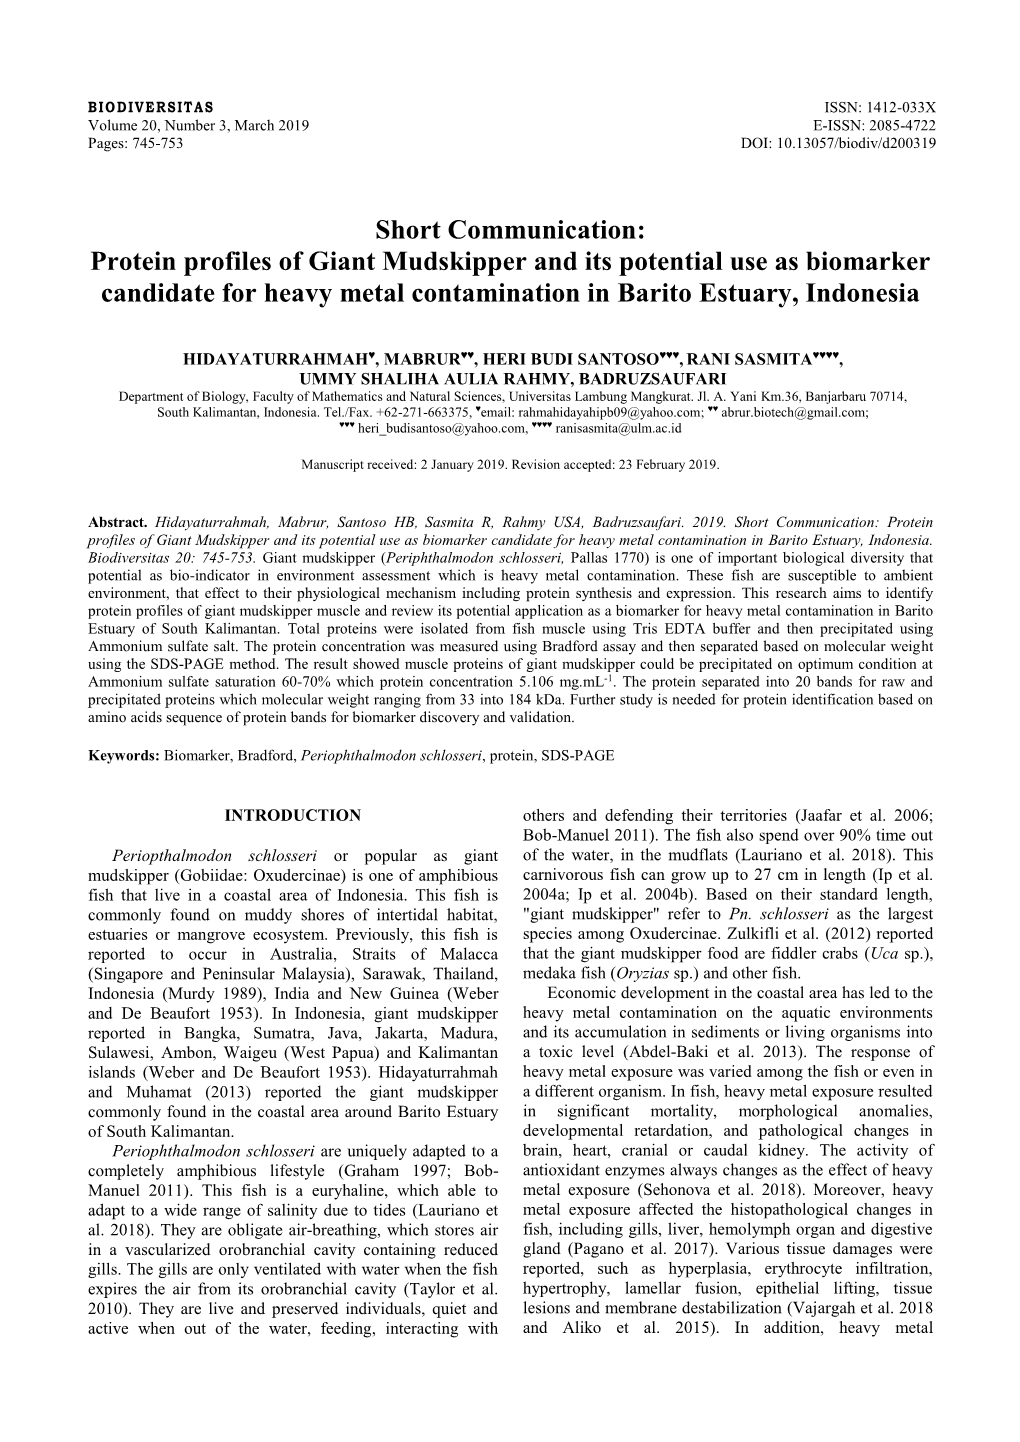 Protein Profiles of Giant Mudskipper and Its Potential Use As Biomarker Candidate for Heavy Metal Contamination in Barito Estuary, Indonesia